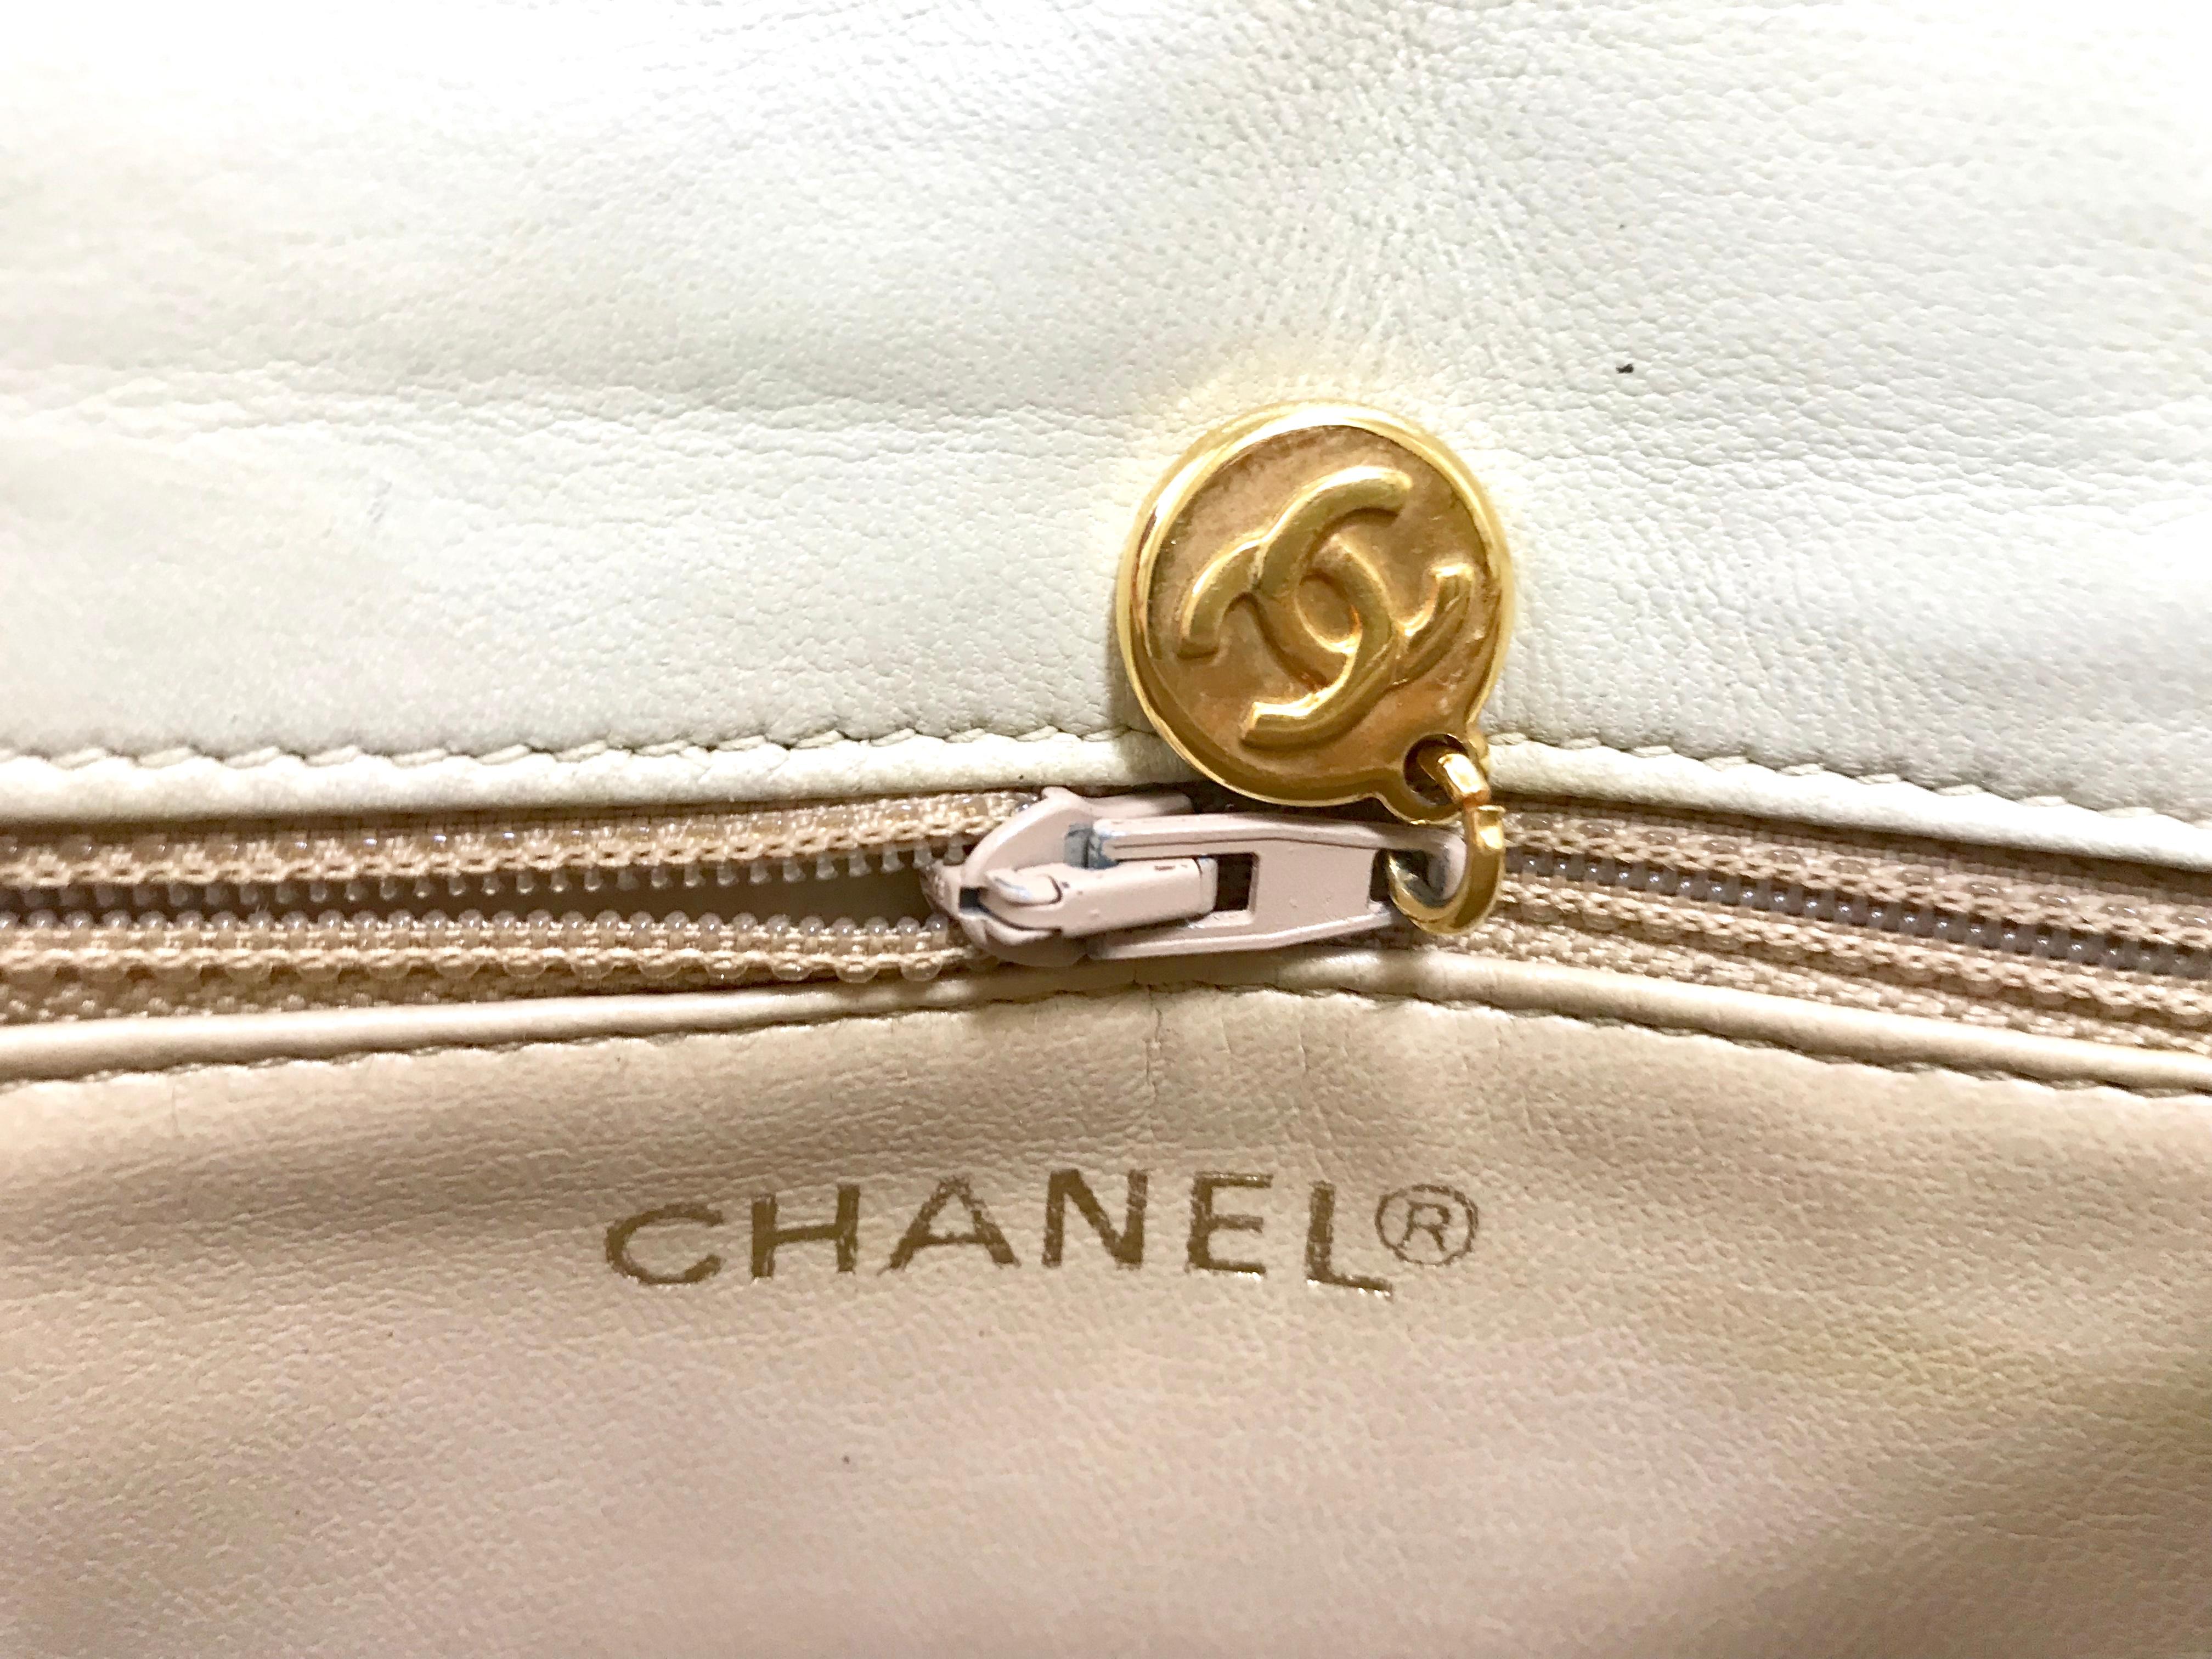 Chanel Vintage ivory / cream lambskin fanny pack hip bag with golden CC closure For Sale 10